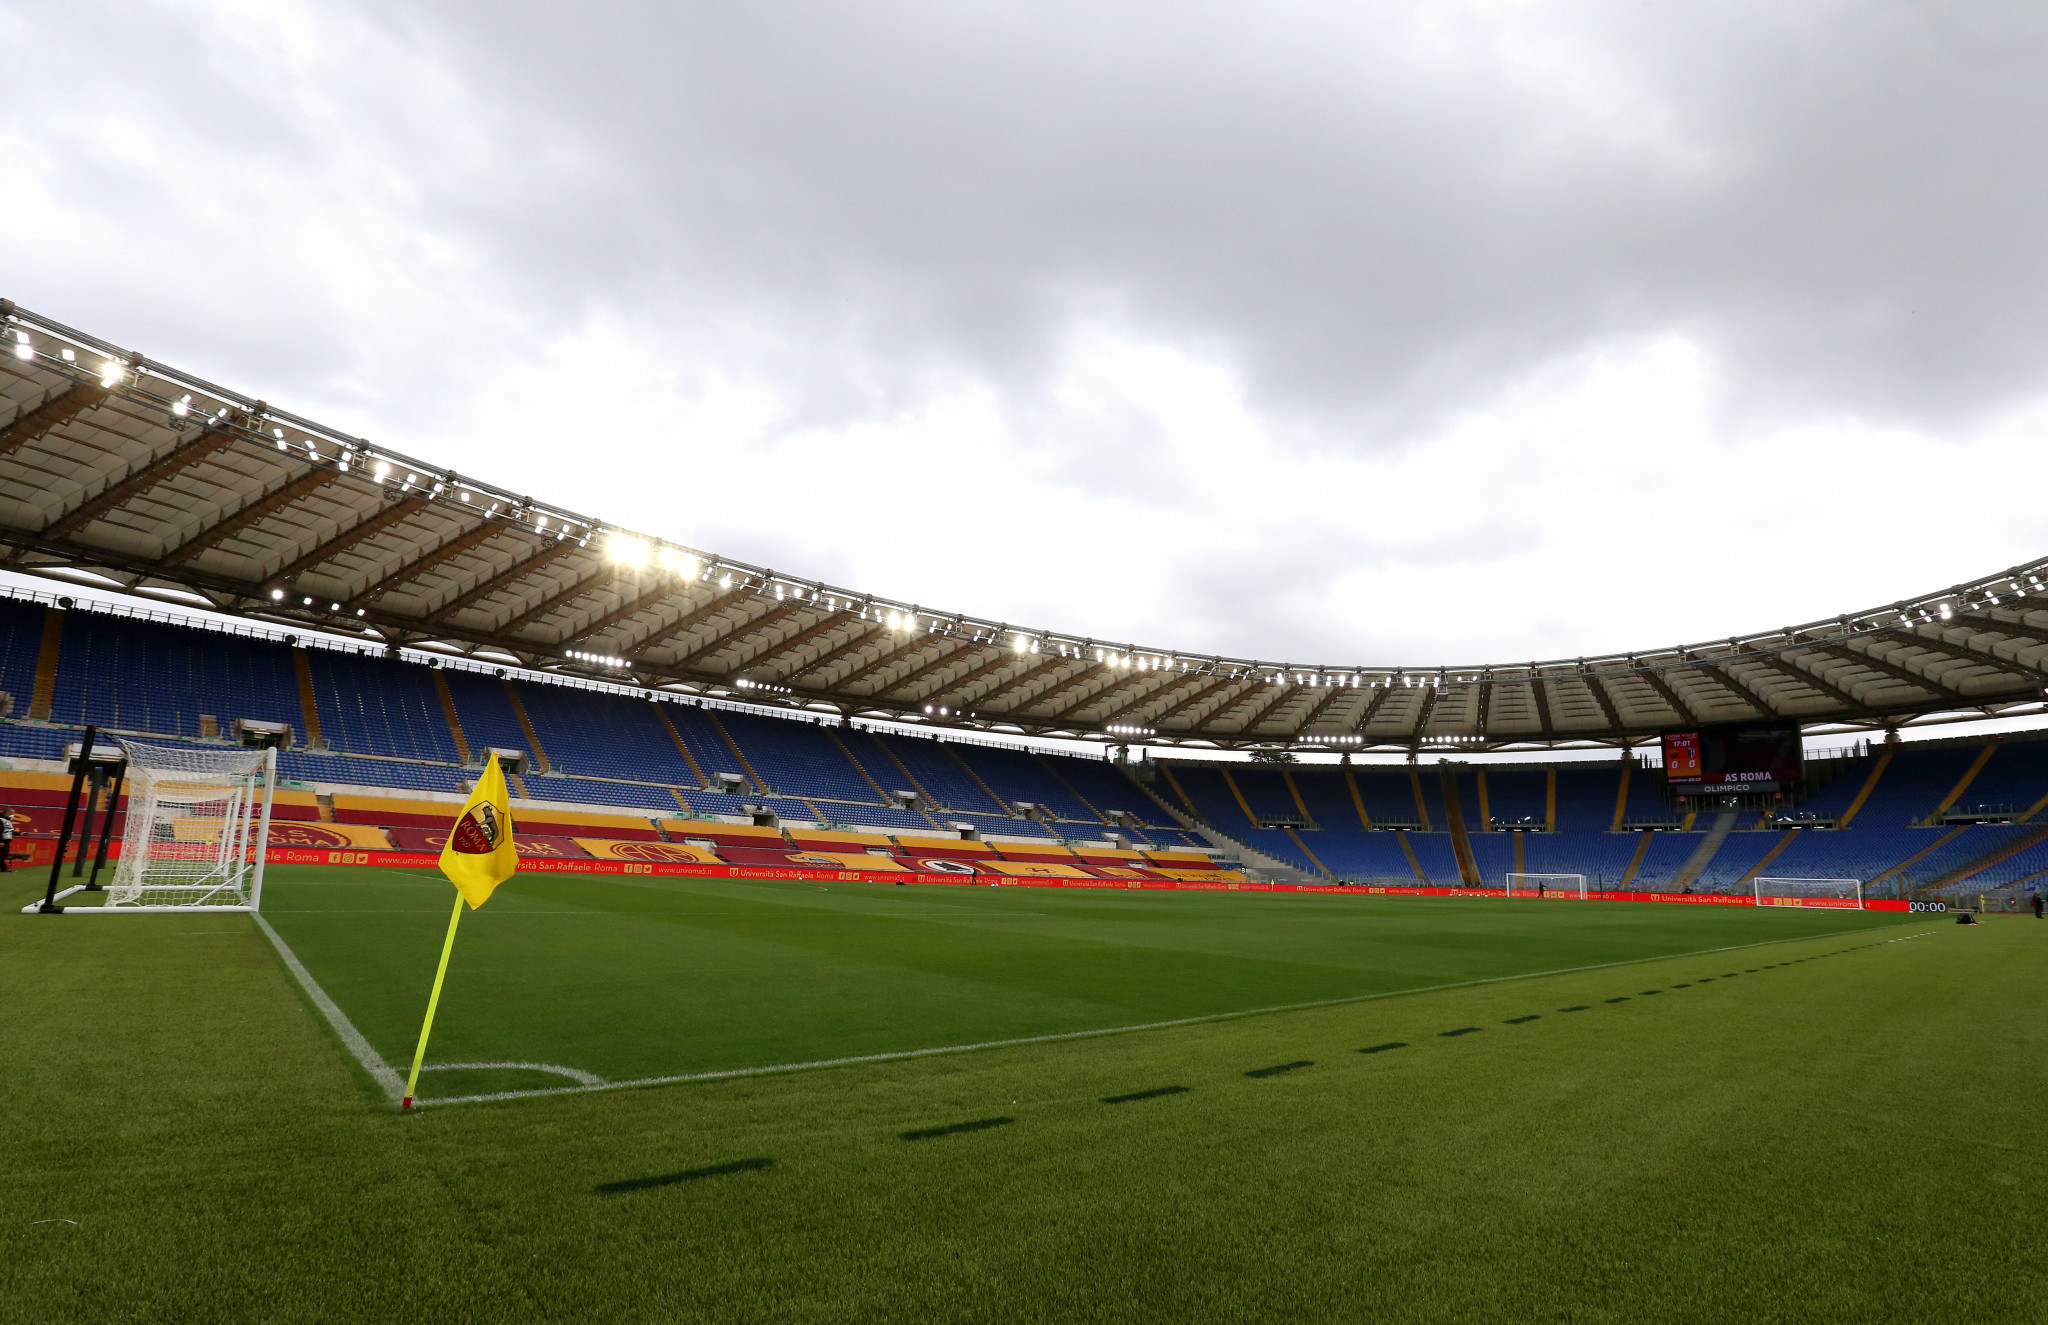 Rome "fully confirmed" as Euro 2020 venue after guaranteeing fans